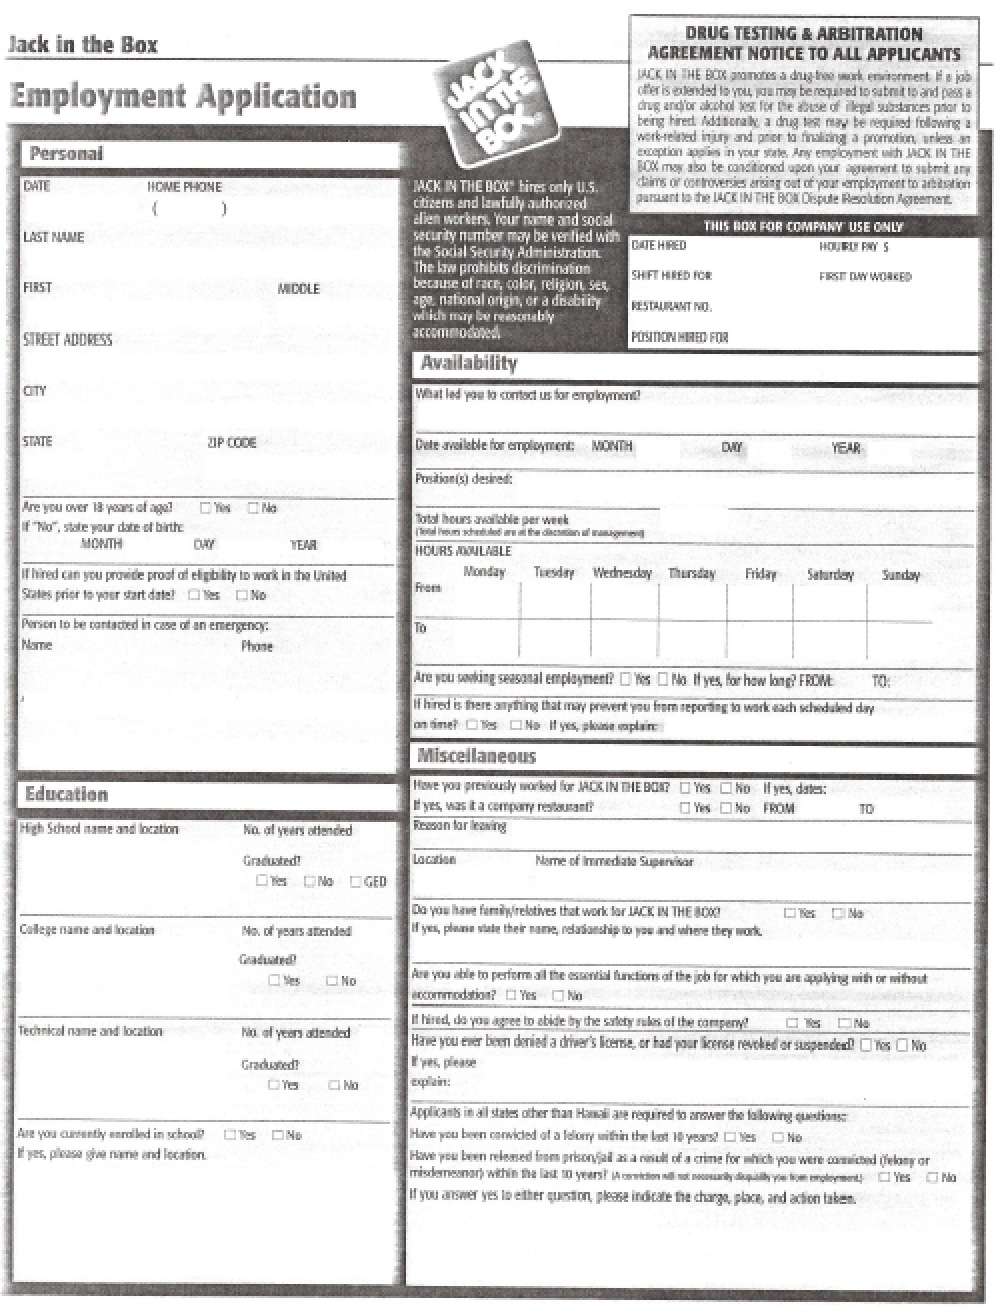 Download Jack in the Box Job Application Form Adobe PDF WikiDownload